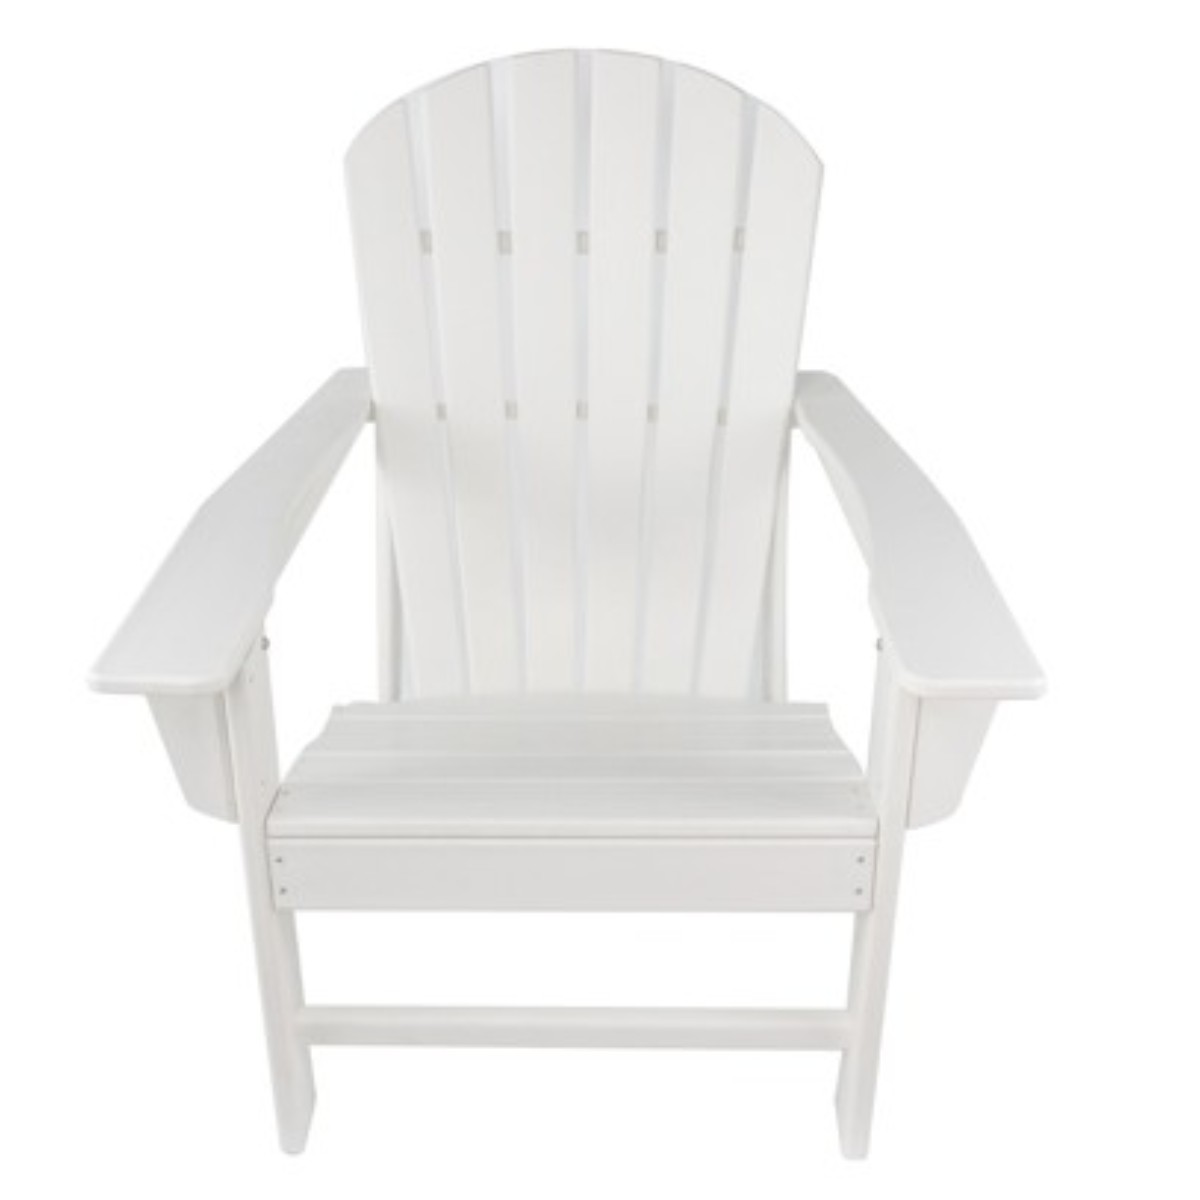 Adirondack Chair Resin, 350 lbs Capacity Load,Patio Chair Lawn Chair Outdoor Adirondack Chairs Weather Resistant for Patio Deck Garden 33.07*31.1*36.4" HDPE Resin Wood,White - image 5 of 9